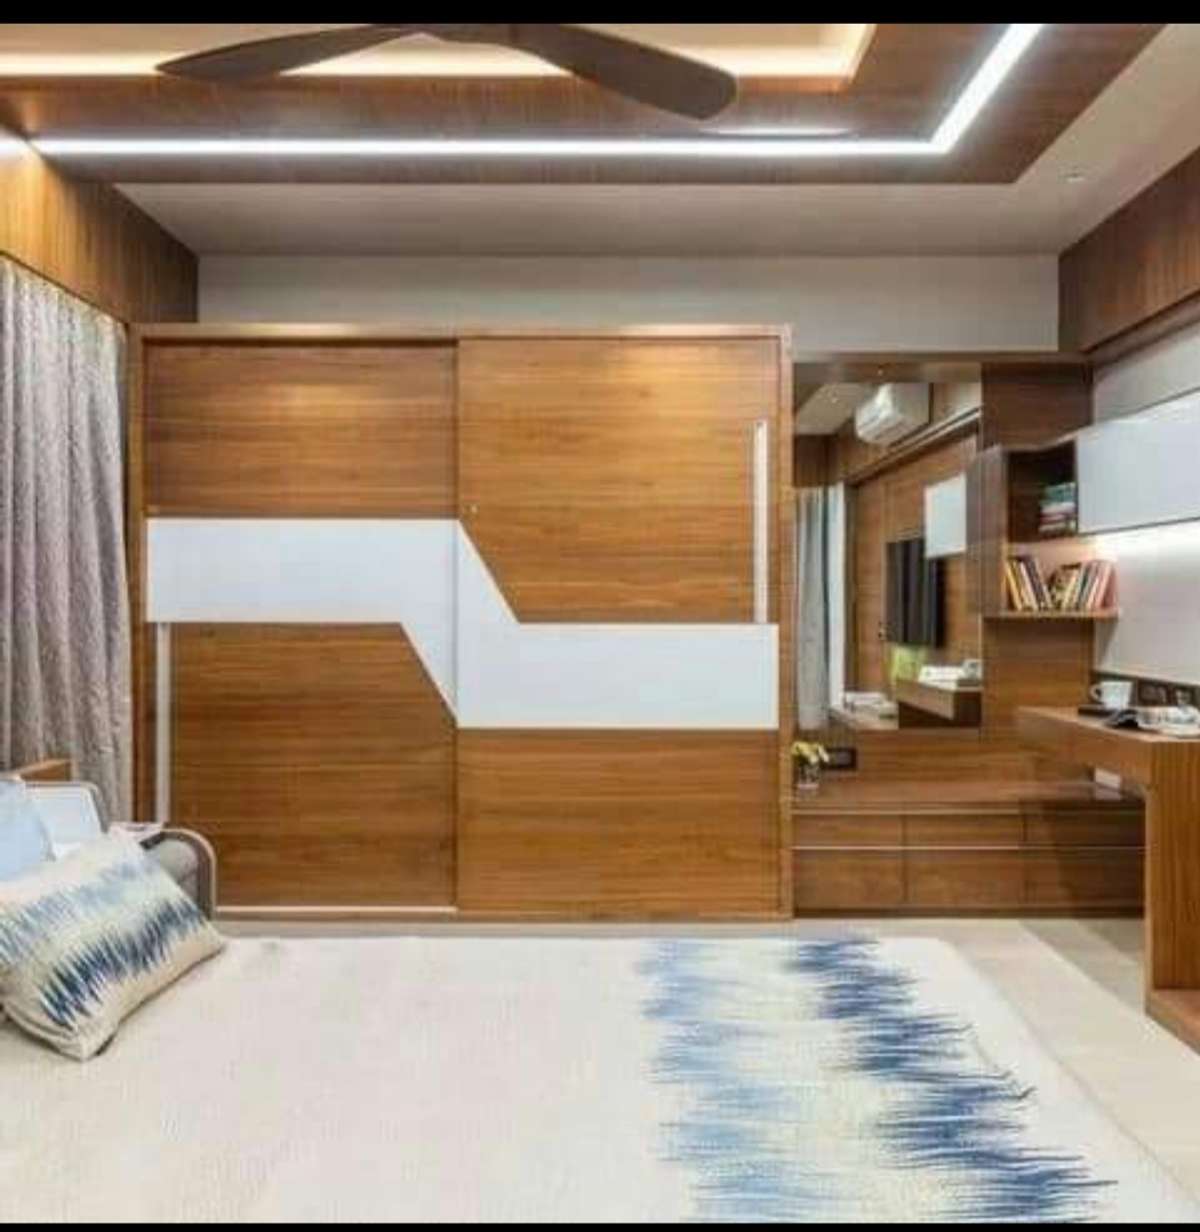 Furniture, Bedroom, Storage Designs by Contractor As Associates, Bhopal | Kolo